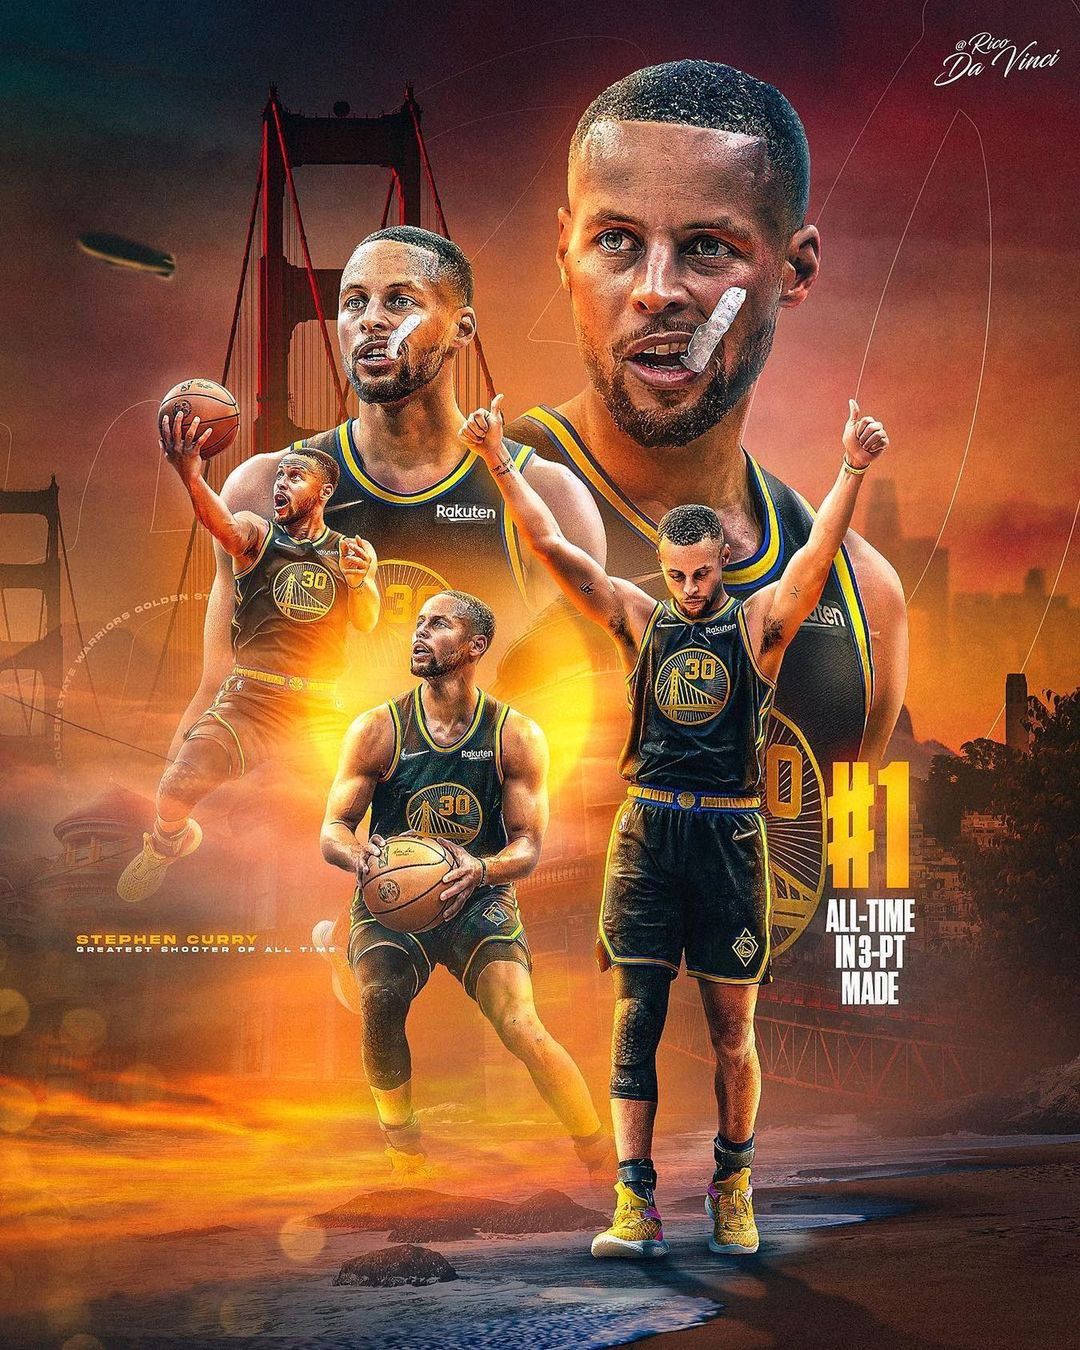 Stephen curry wallpaper ideas. stephen curry wallpaper, curry wallpaper, stephen curry